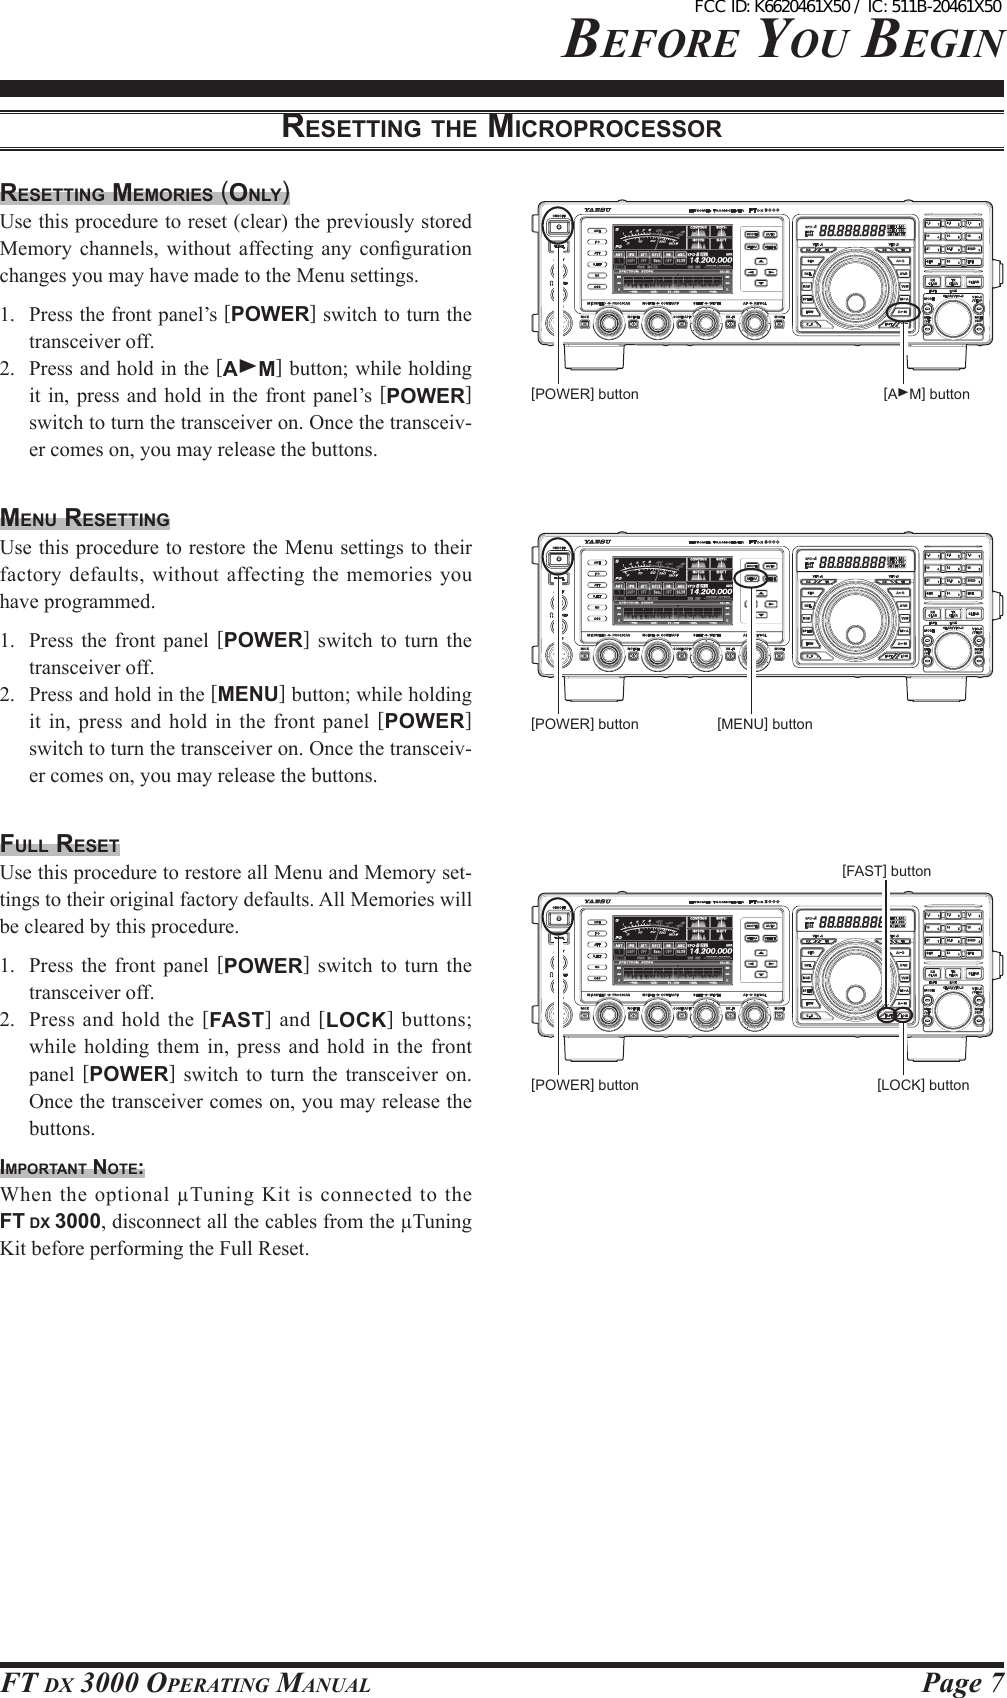 Page 7FT DX 3000 OperaTing Manual[POWER] button [AM] buttonbeFOre YOu beginreSetting the MicroproceSSorreSetting MeMorieS (only)Use this procedure to reset (clear) the previously stored Memory channels,  without  affecting any  conguration changes you may have made to the Menu settings.1.  Press the front panel’s [POWER] switch to turn the transceiver off.2.  Press and hold in the [AM] button; while holding it in, press  and  hold  in  the front panel’s [POWER] switch to turn the transceiver on. Once the transceiv-er comes on, you may release the buttons.Menu reSettingUse this procedure to restore the Menu settings to their factory defaults, without affecting  the memories you have programmed.1.  Press the  front panel [POWER]  switch  to  turn the transceiver off.2.  Press and hold in the [MENU] button; while holding it in, press and hold in  the front  panel [POWER] switch to turn the transceiver on. Once the transceiv-er comes on, you may release the buttons.Full reSetUse this procedure to restore all Menu and Memory set-tings to their original factory defaults. All Memories will be cleared by this procedure.1.  Press the  front panel [POWER]  switch  to  turn the transceiver off.2.  Press  and hold  the  [FAST] and  [LOCK] buttons; while holding  them  in, press and hold  in  the front panel  [POWER]  switch  to  turn the transceiver  on. Once the transceiver comes on, you may release the buttons.iMportAnt note:When  the  optional  µTuning  Kit  is  connected  to  the FT DX 3000, disconnect all the cables from the µTuning Kit before performing the Full Reset.[LOCK] button[FAST] button[POWER] button [MENU] button[POWER] buttonFCC ID: K6620461X50 / IC: 511B-20461X50